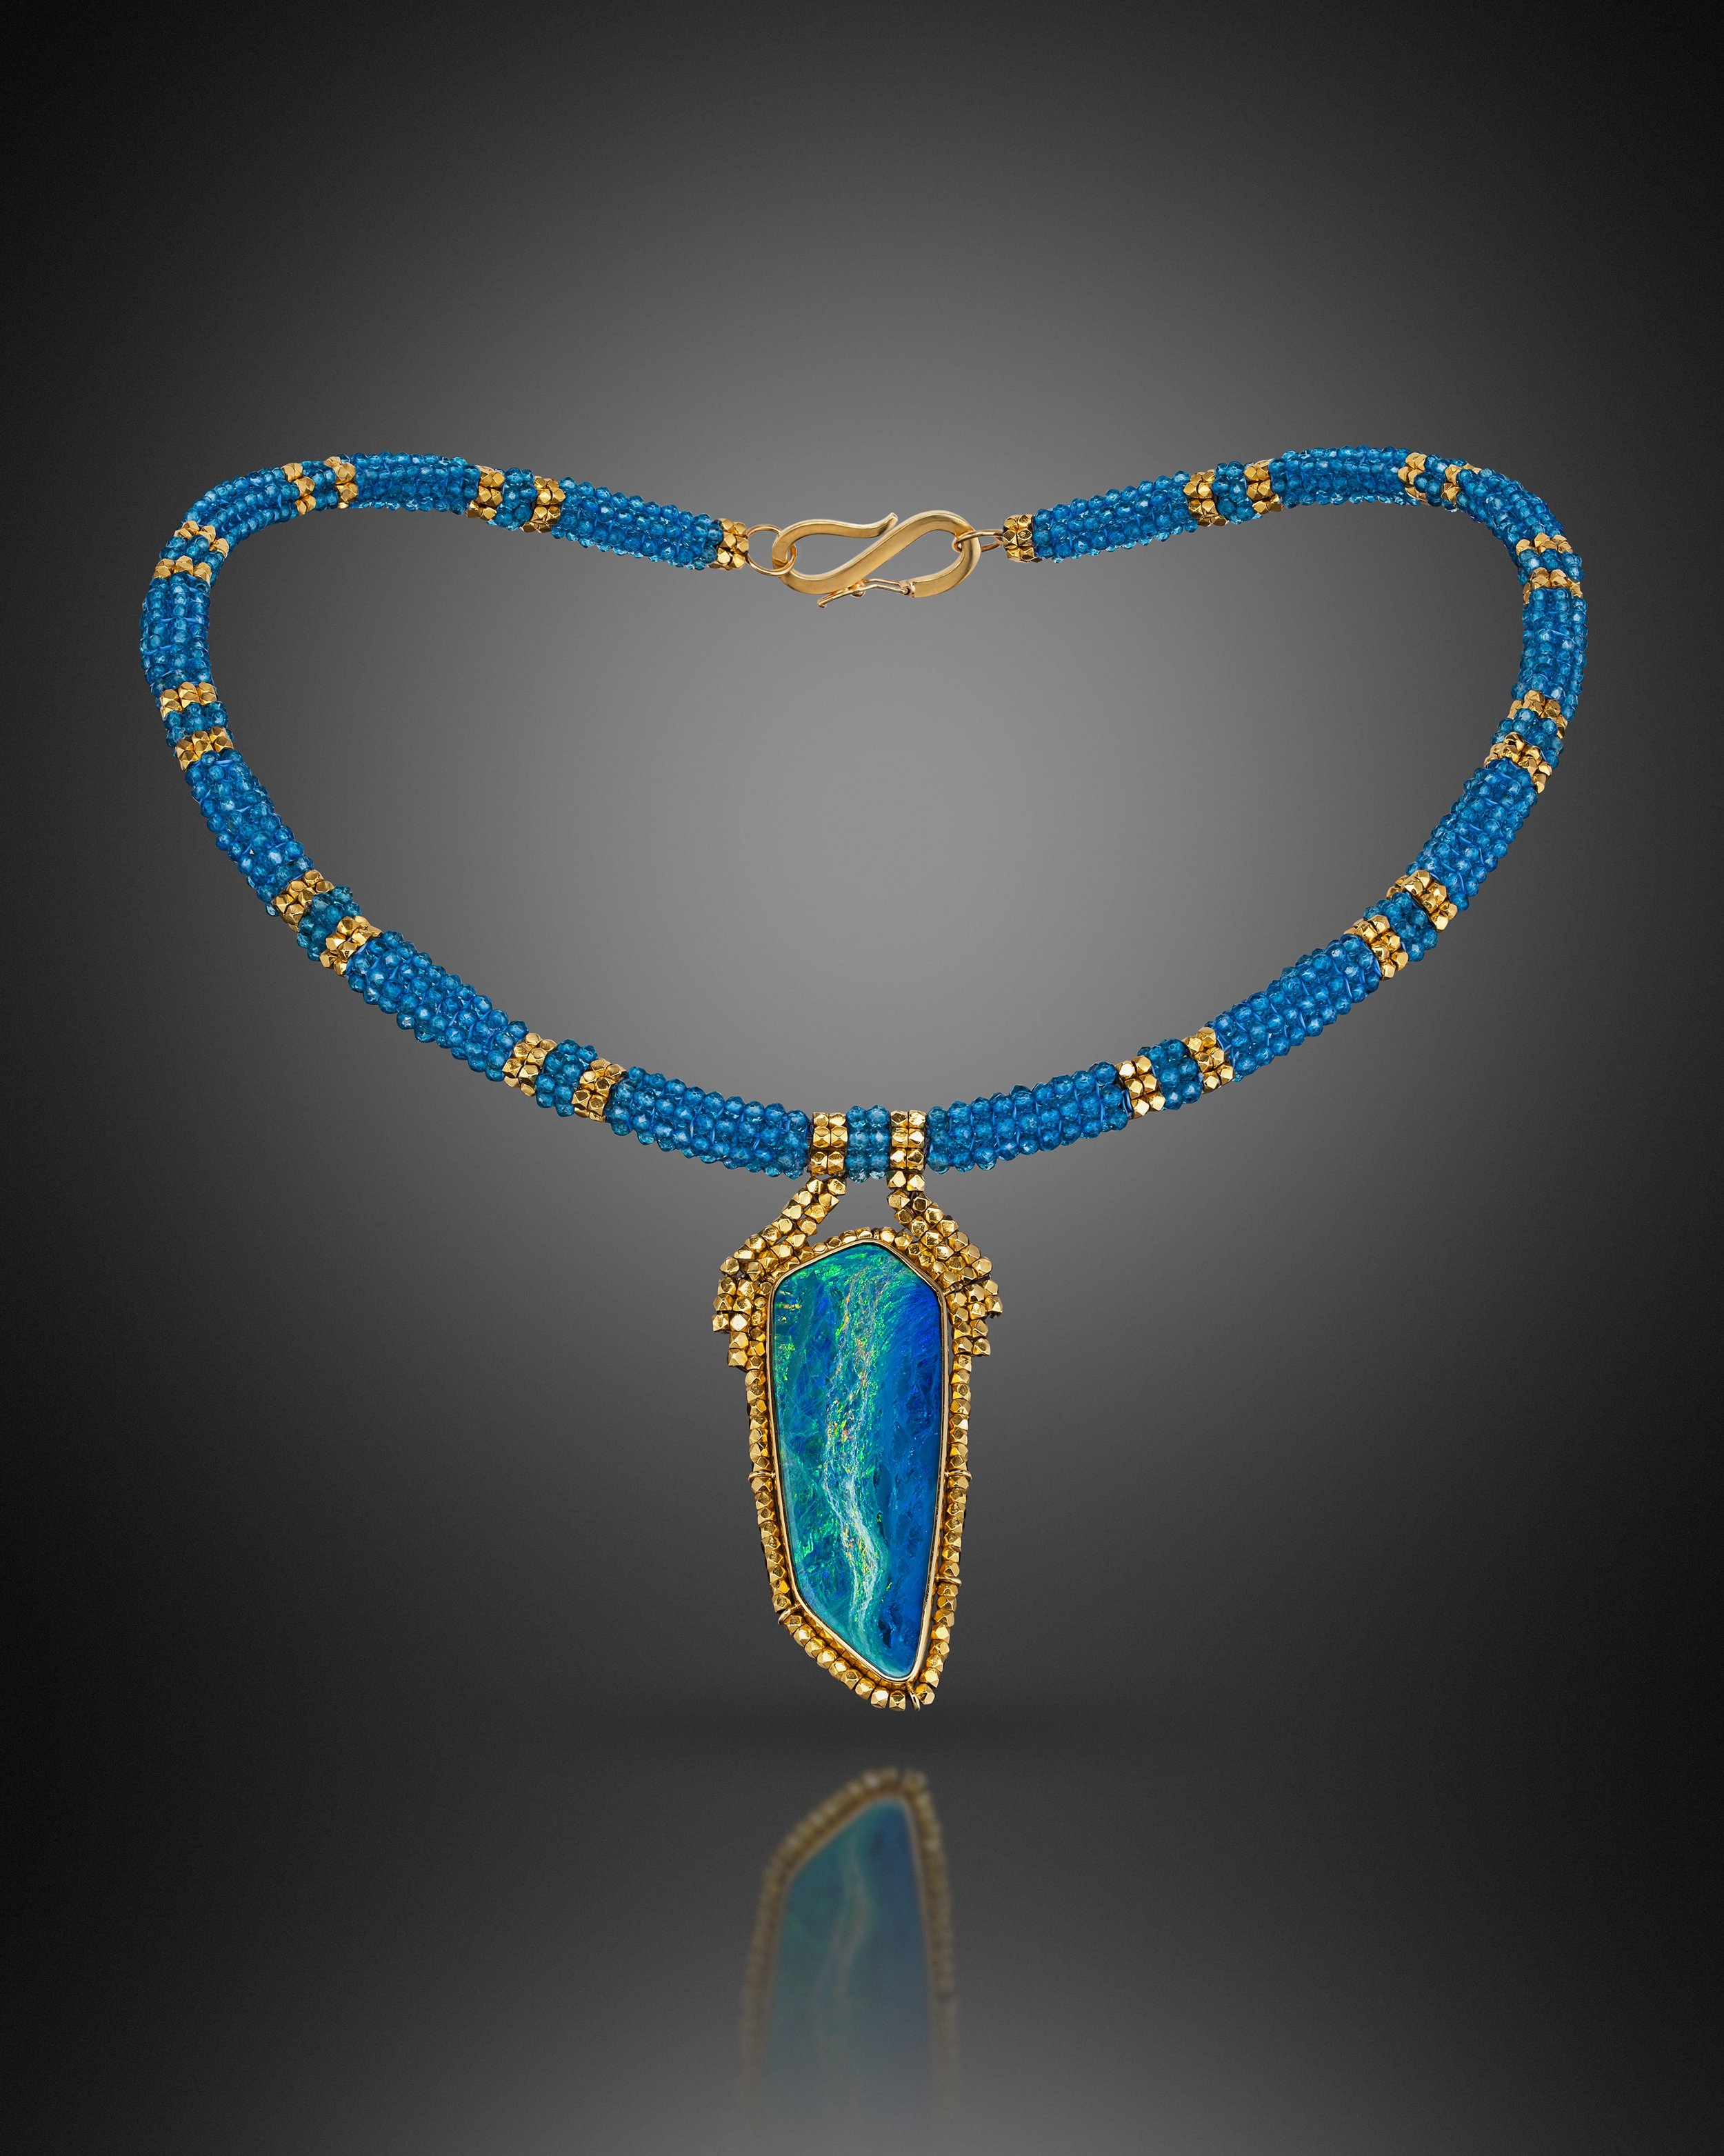 Seascape Choker.  Woven cord is made of blue topaz and 18k beads; pendant is hand fabricated of 18k gold, set with an Australian opal, surrounded by 18k gold beads.